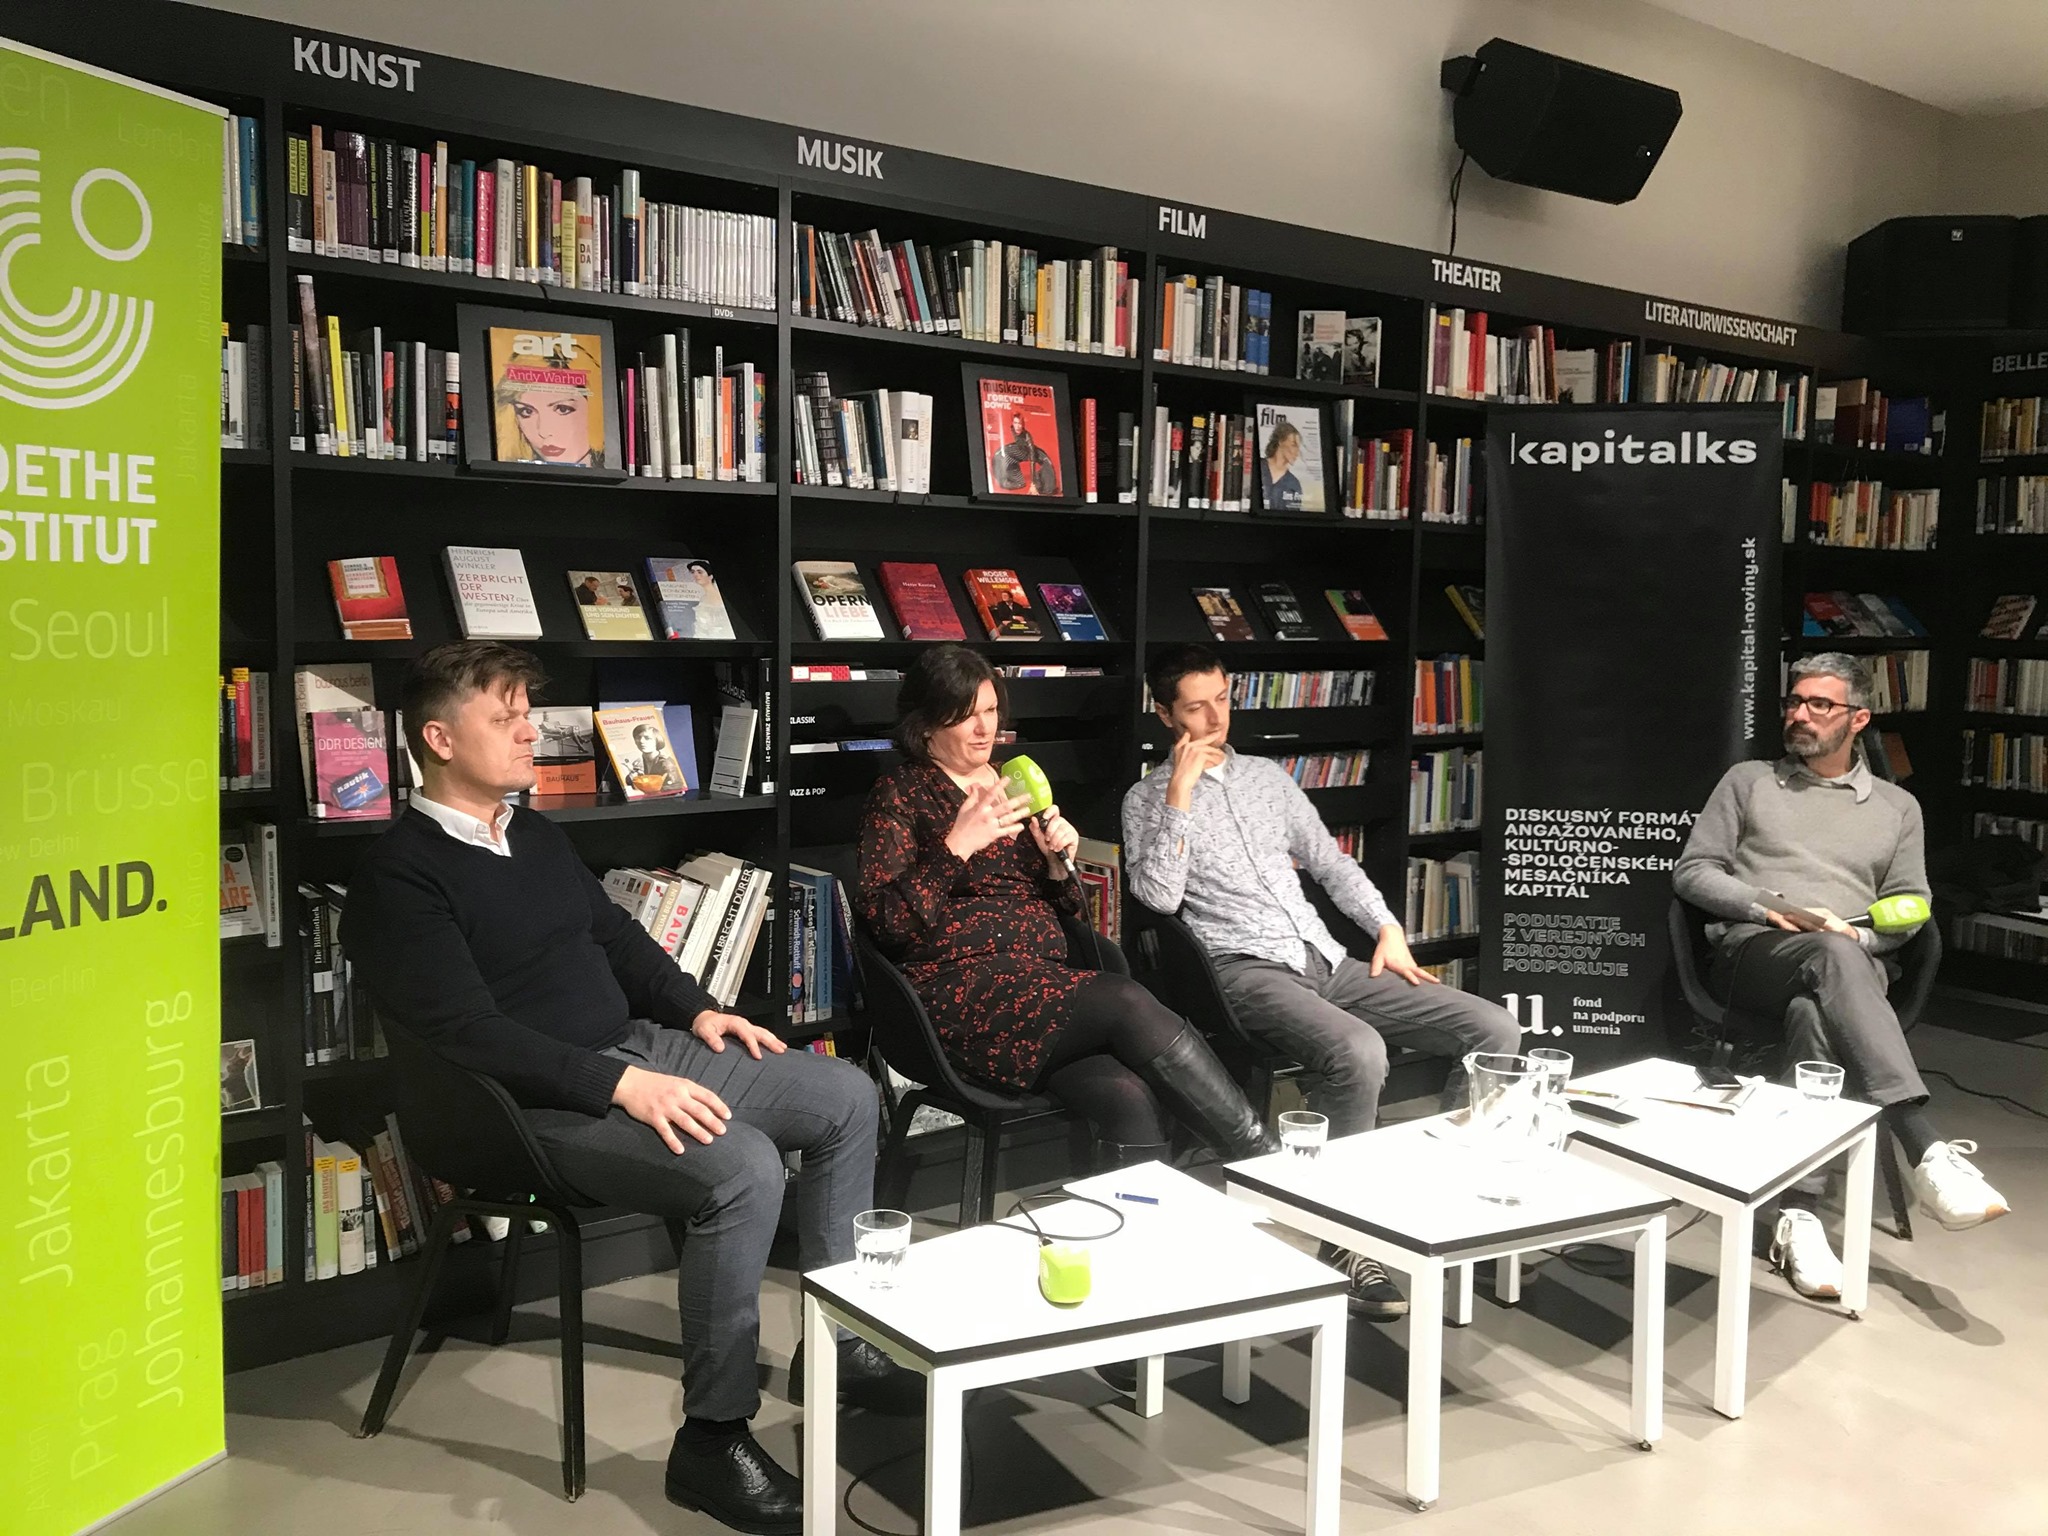 Monika Martišková participated in the discussion about precarious work organized by the Slovak magazin Kapitál